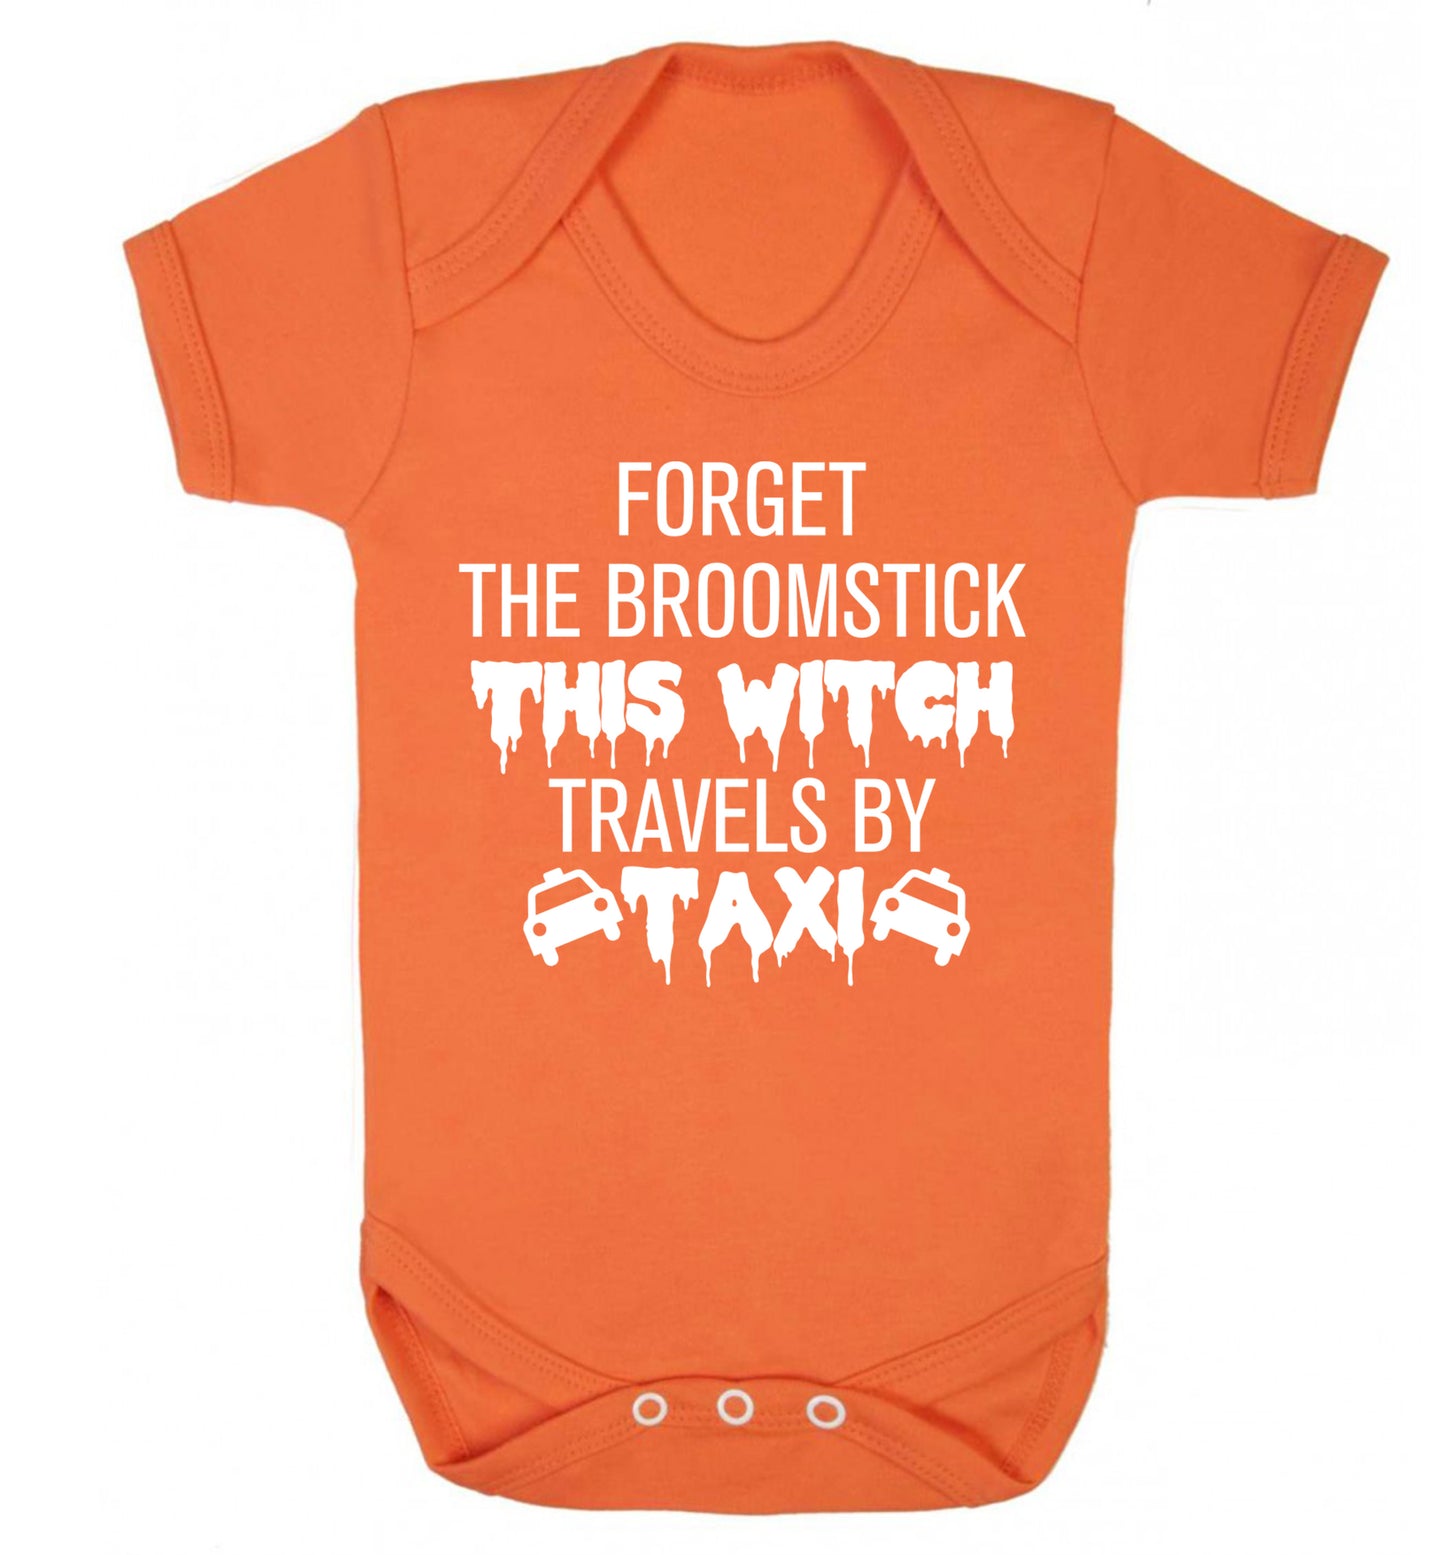 Forget the broomstick this witch travels by taxi Baby Vest orange 18-24 months